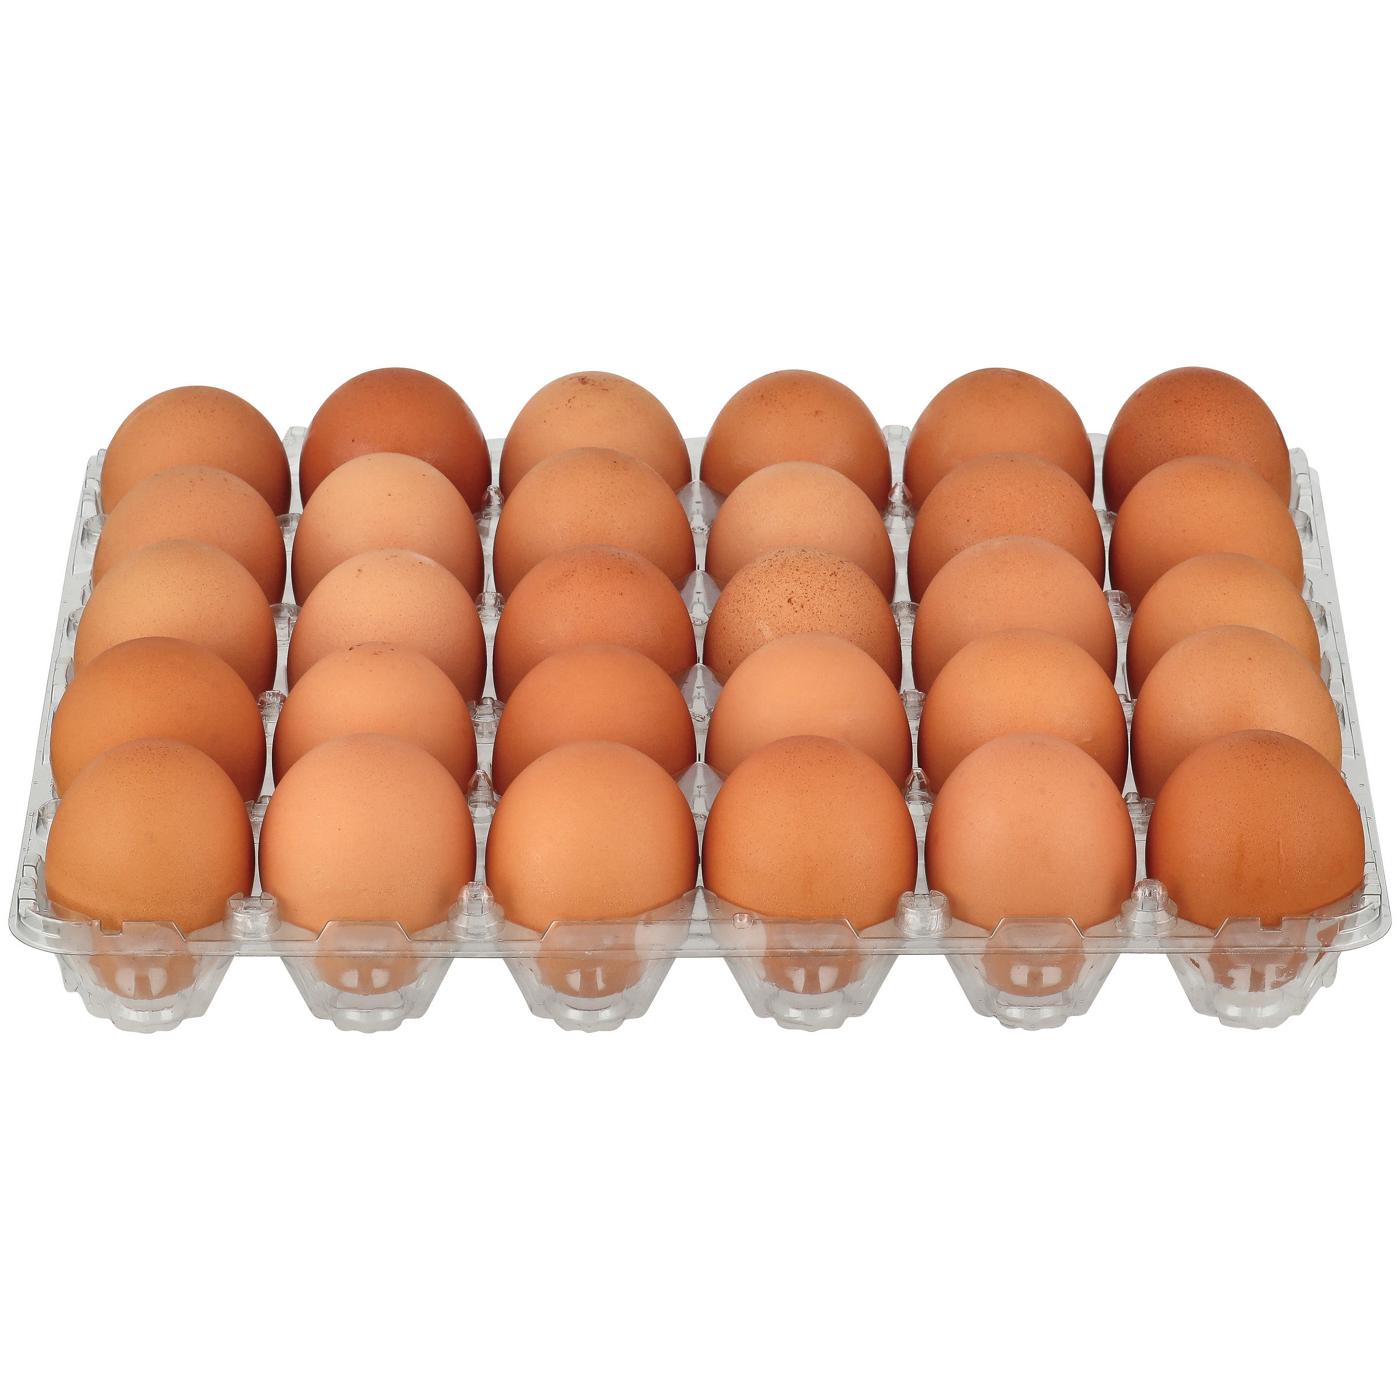 H-E-B Grade AA Cage Free Extra Large Brown Eggs; image 4 of 4